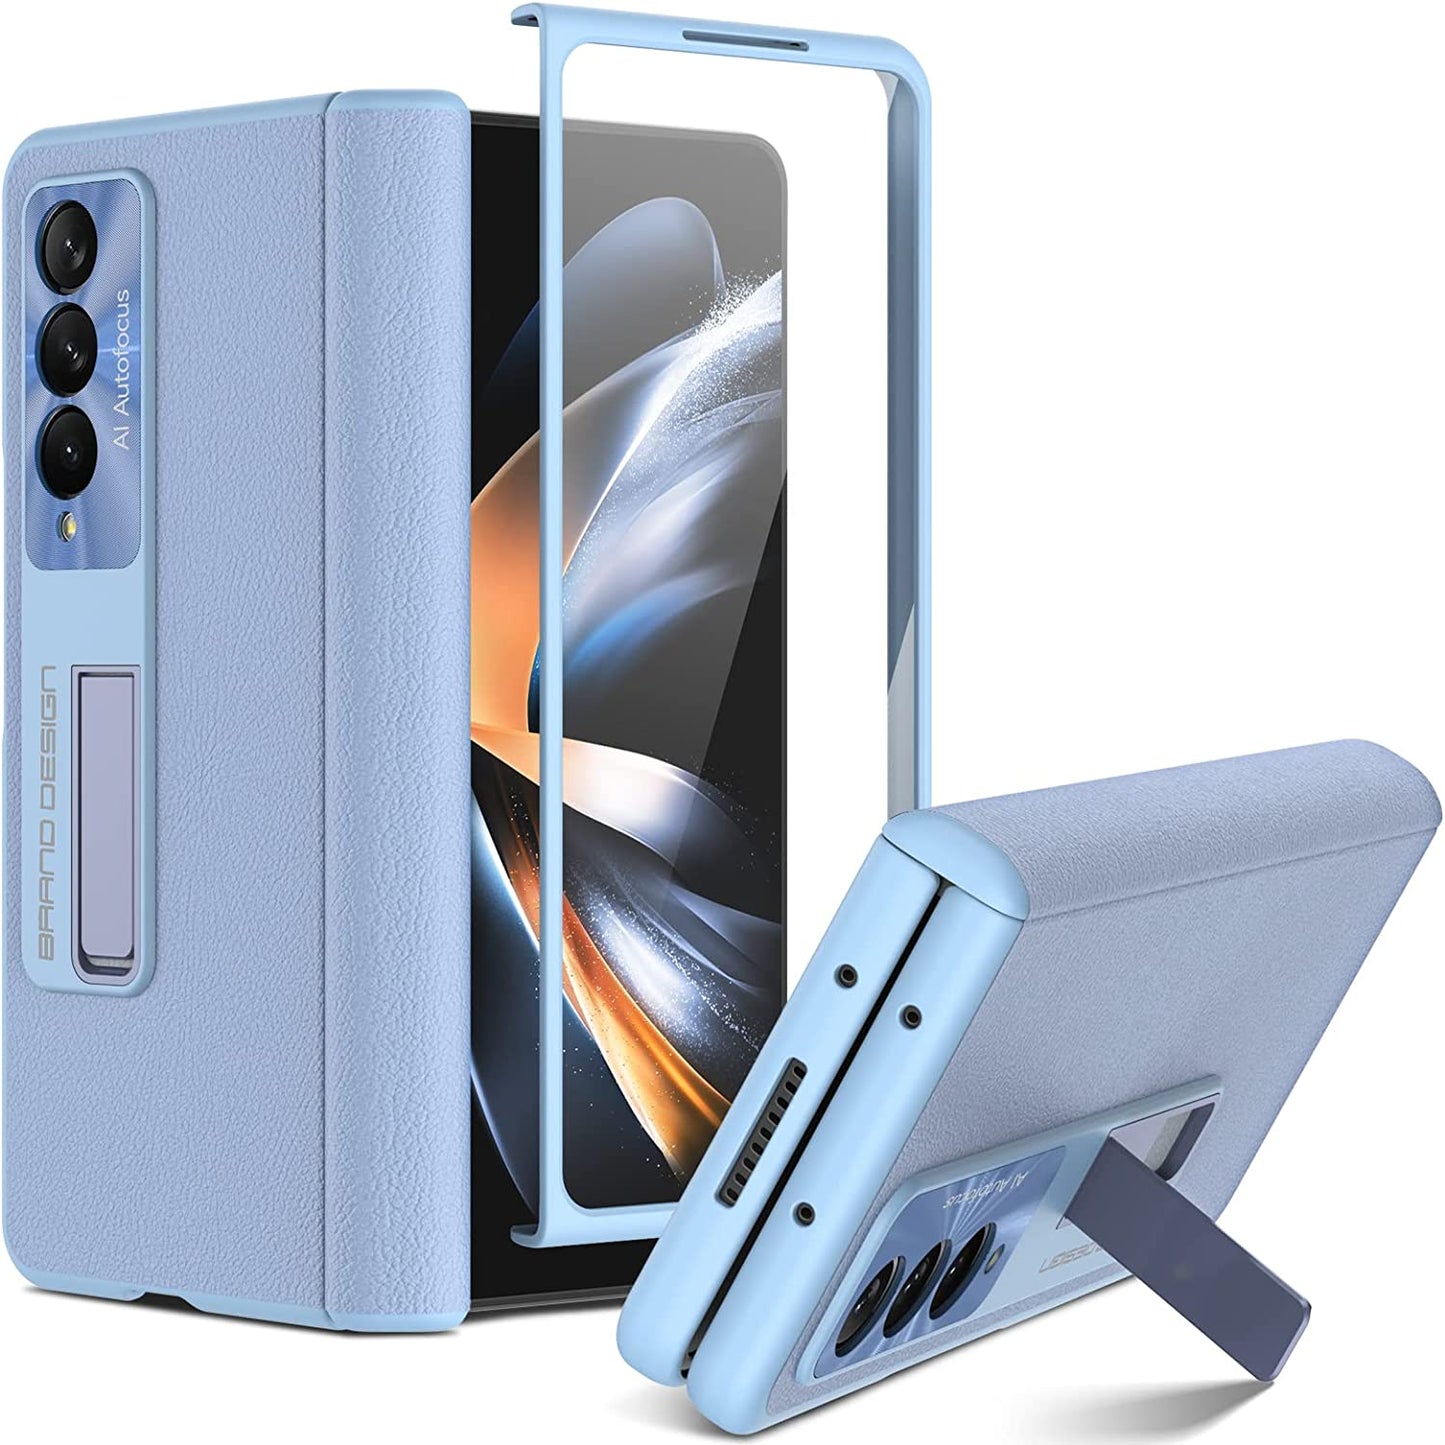 Magnetic Hinge Case with Front Screen Glass